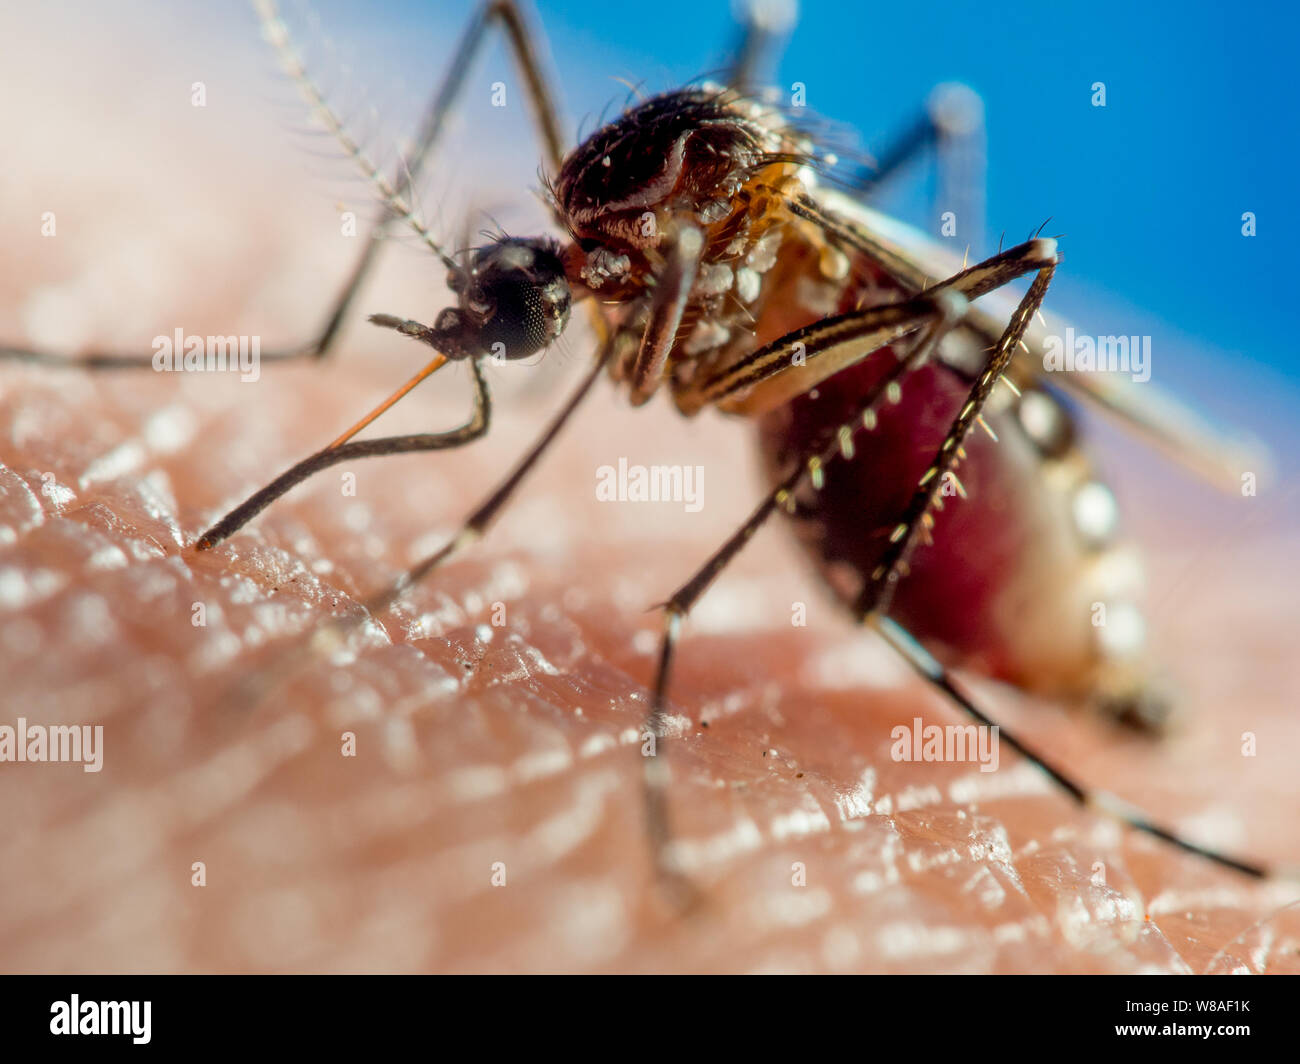 Close-up of a dengue fever mosquito (Aedes aegypti) feeding on human blood Stock Photo